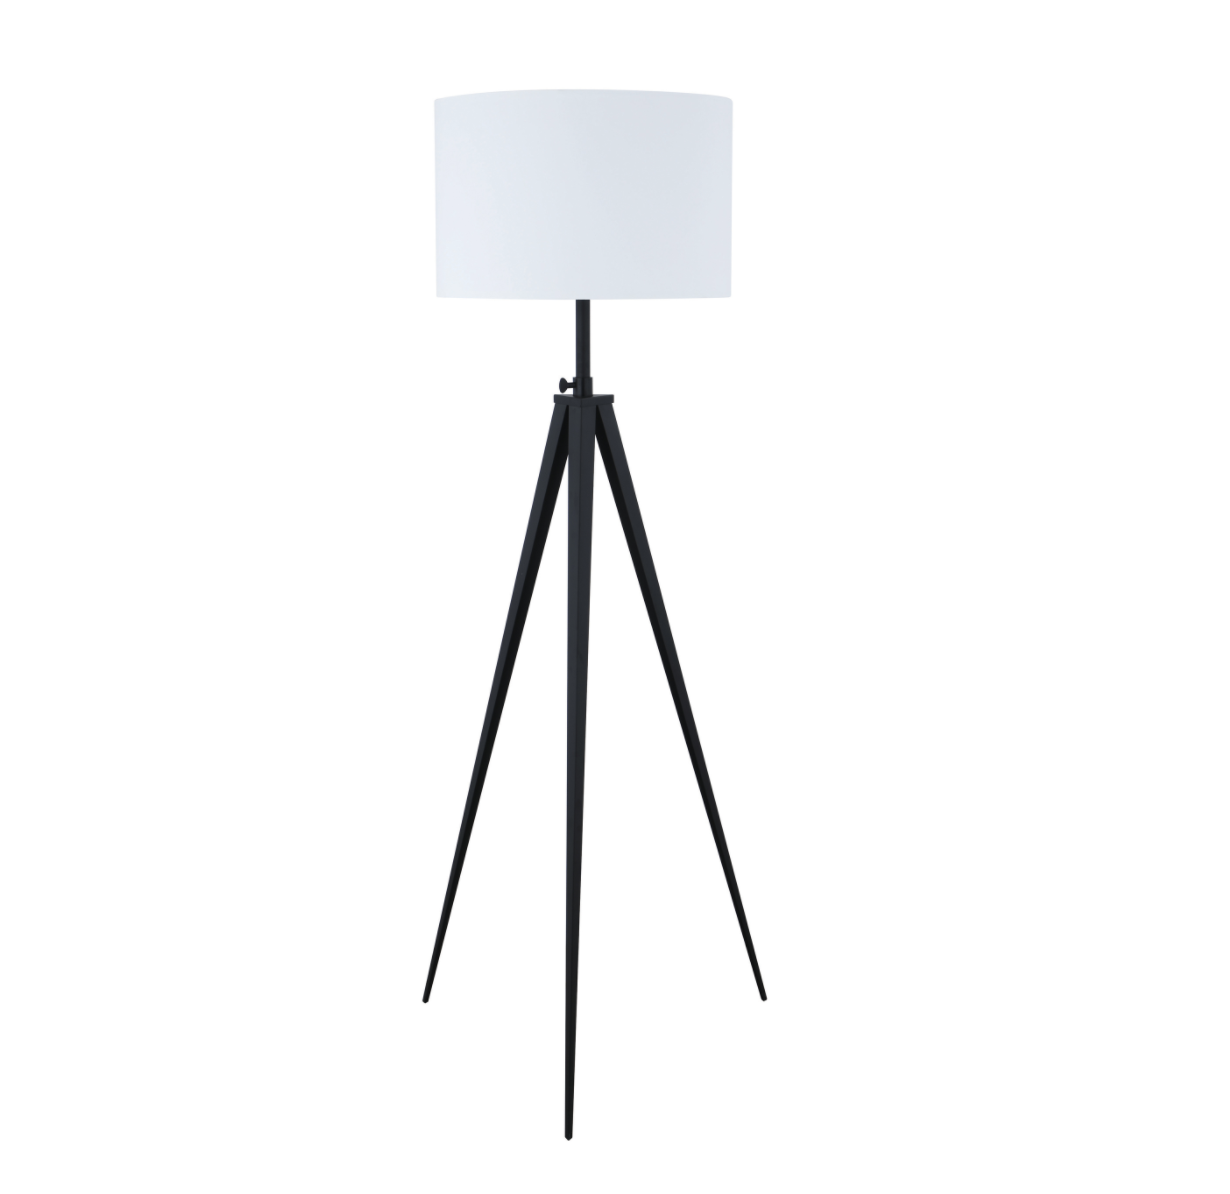 6 Month Rental | The Artifact Floor Lamp | From $25/mo